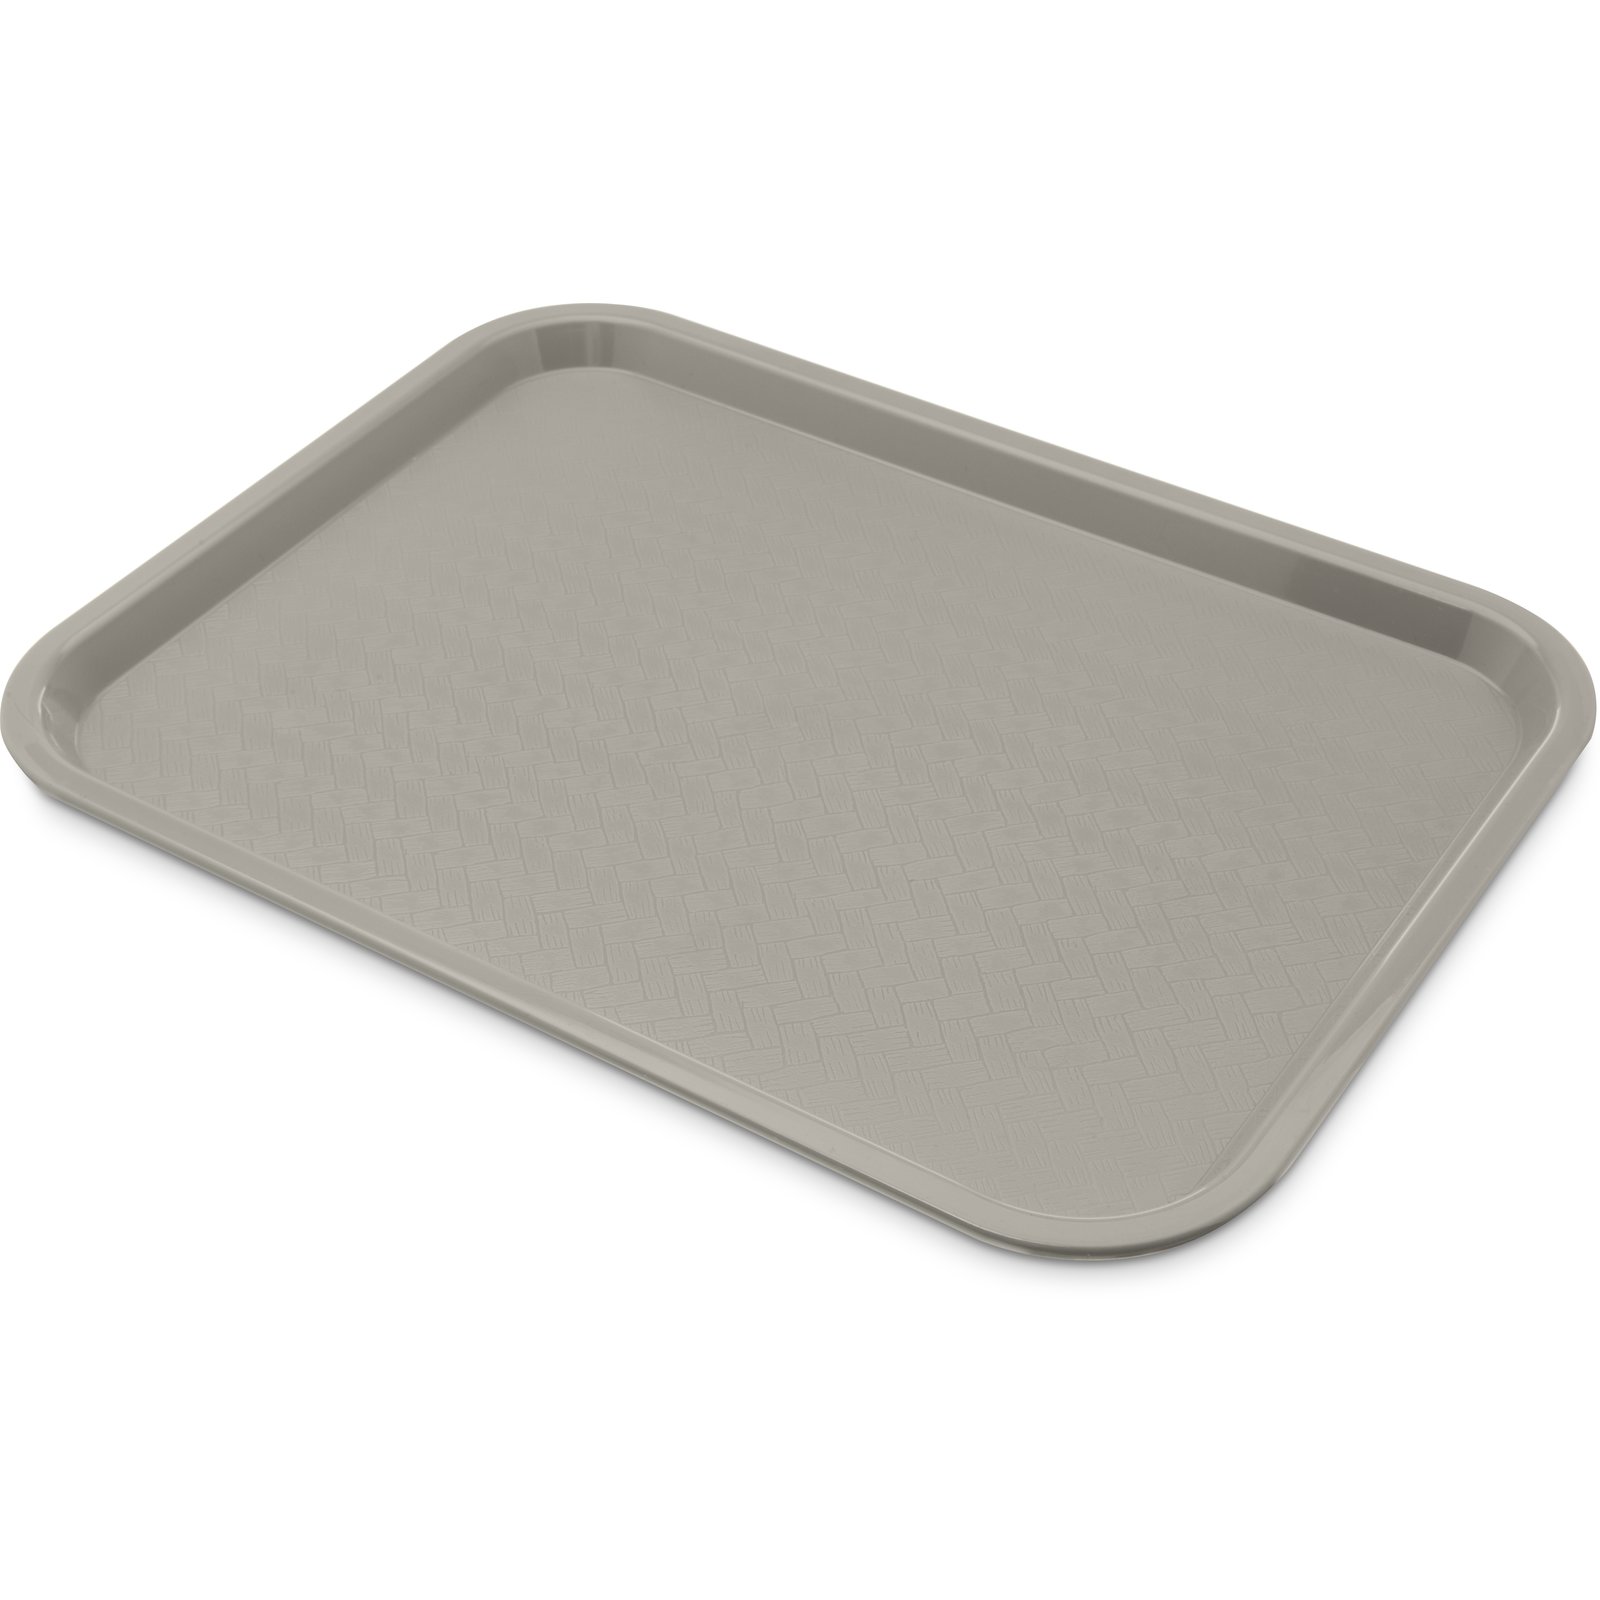 CT121623 - Cafe® Fast Food Cafeteria Tray 12 x 16 - Gray